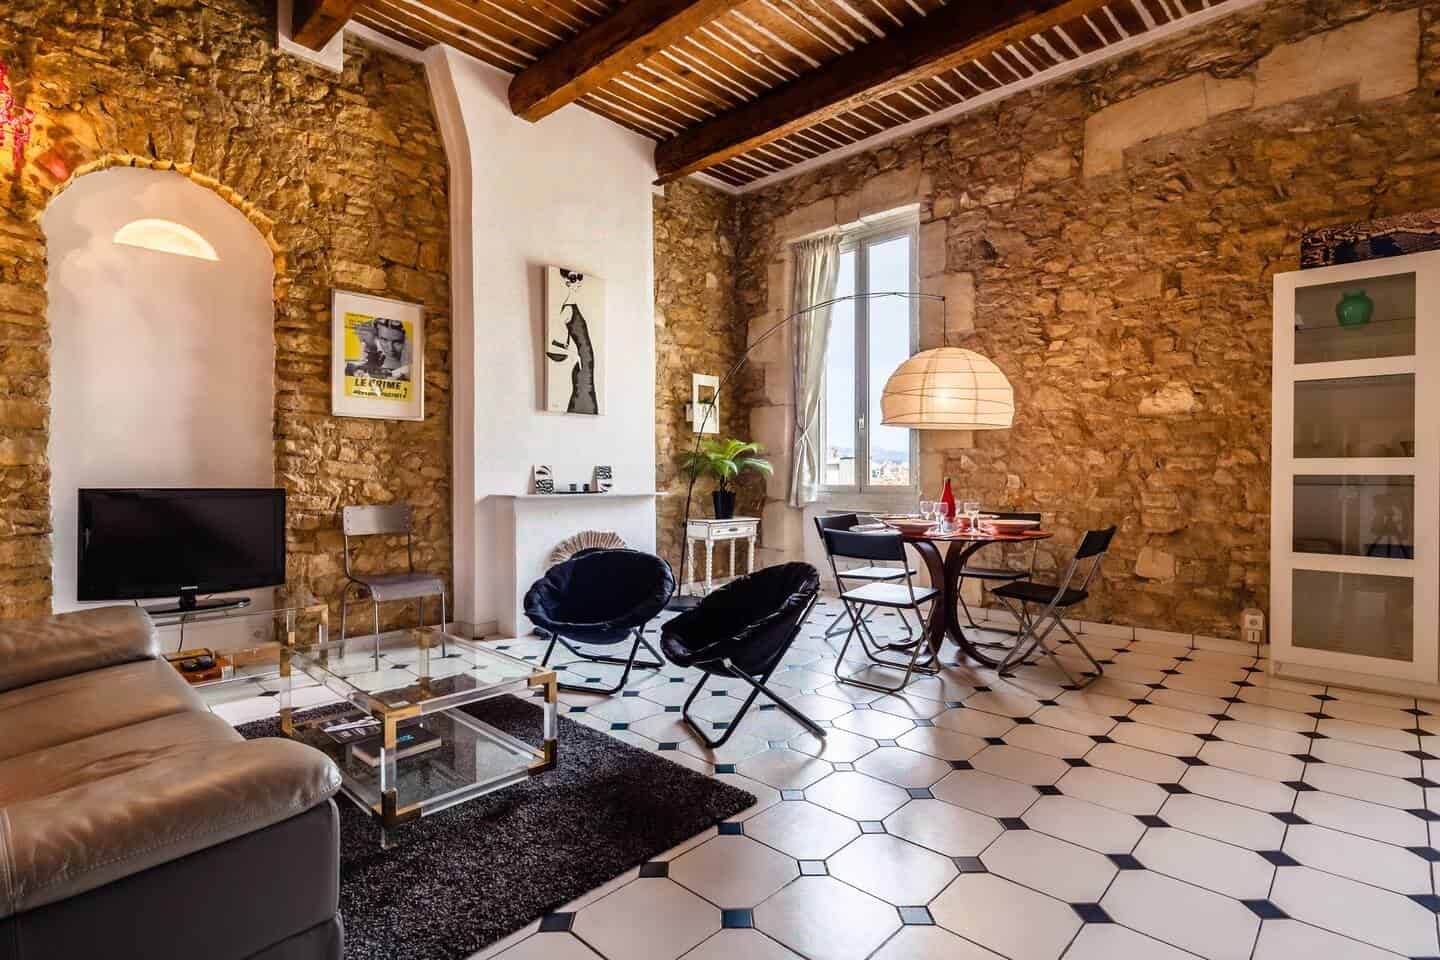 Image of Airbnb rental in Marseille, France